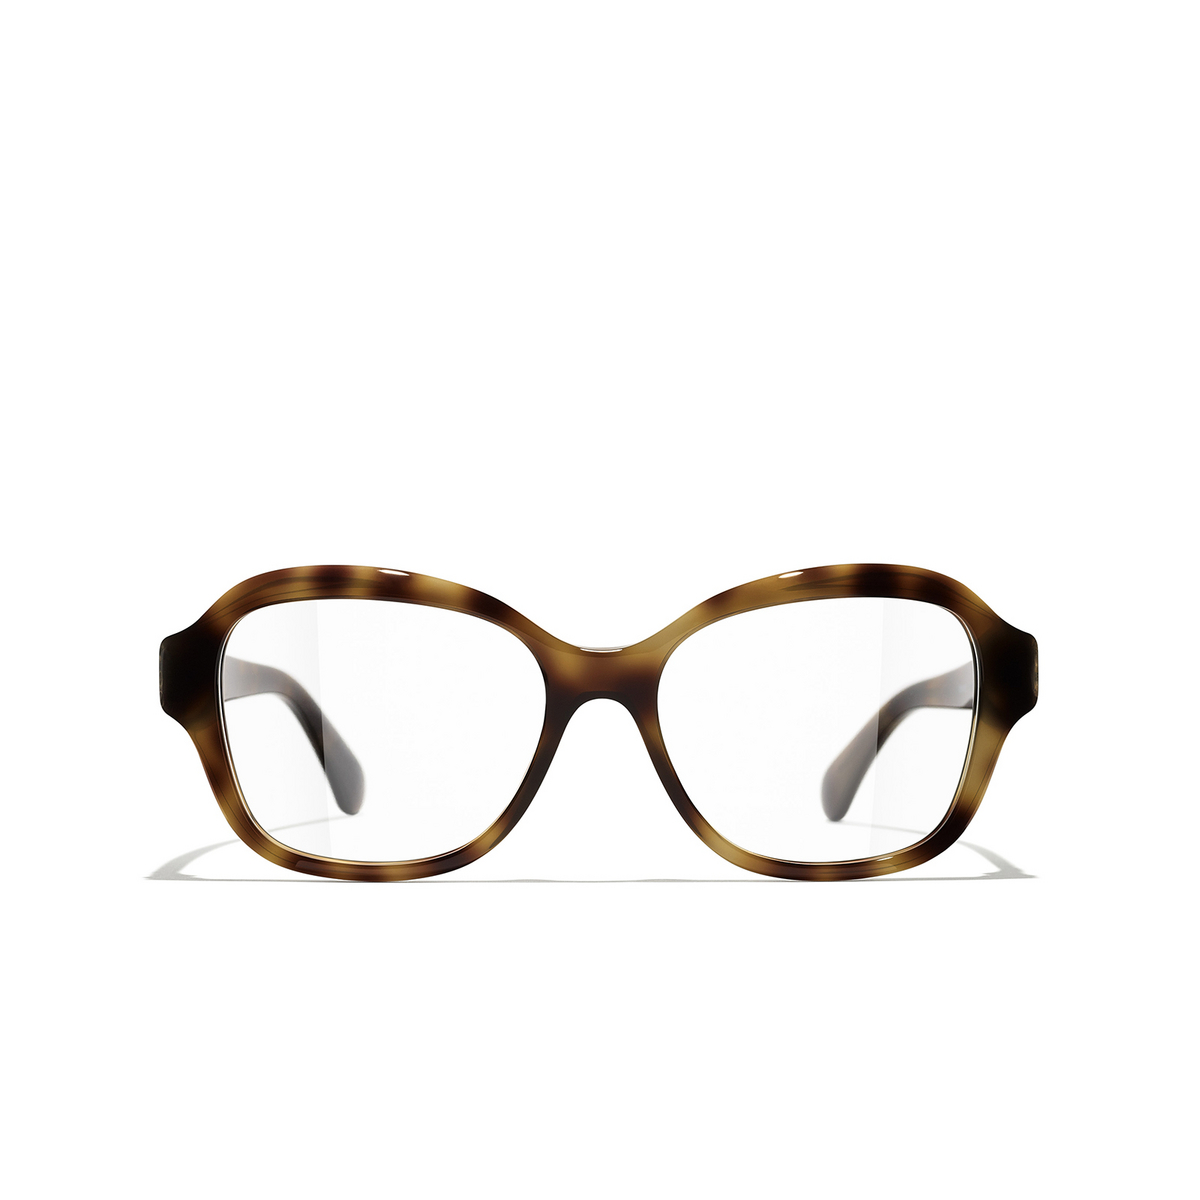 CHANEL square Eyeglasses 1717 Tortoise - front view